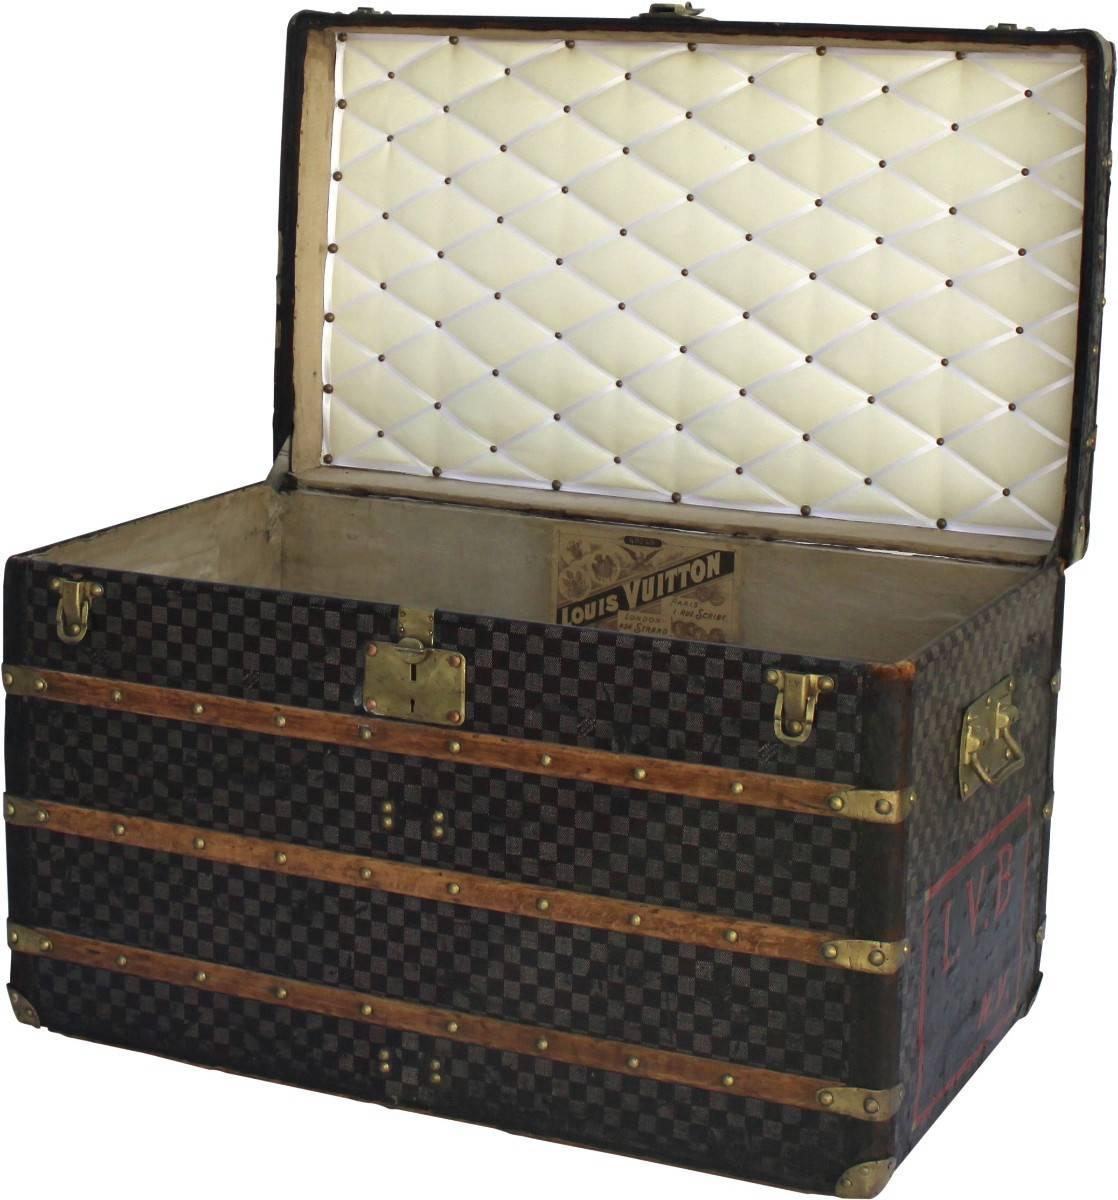 Finished in the iconic Damier pattern from Louis Vuitton this incredible trunk would make a perfectly sized coffee table. 

The leather edging has a beautiful patina and is adorned with brass hardware.